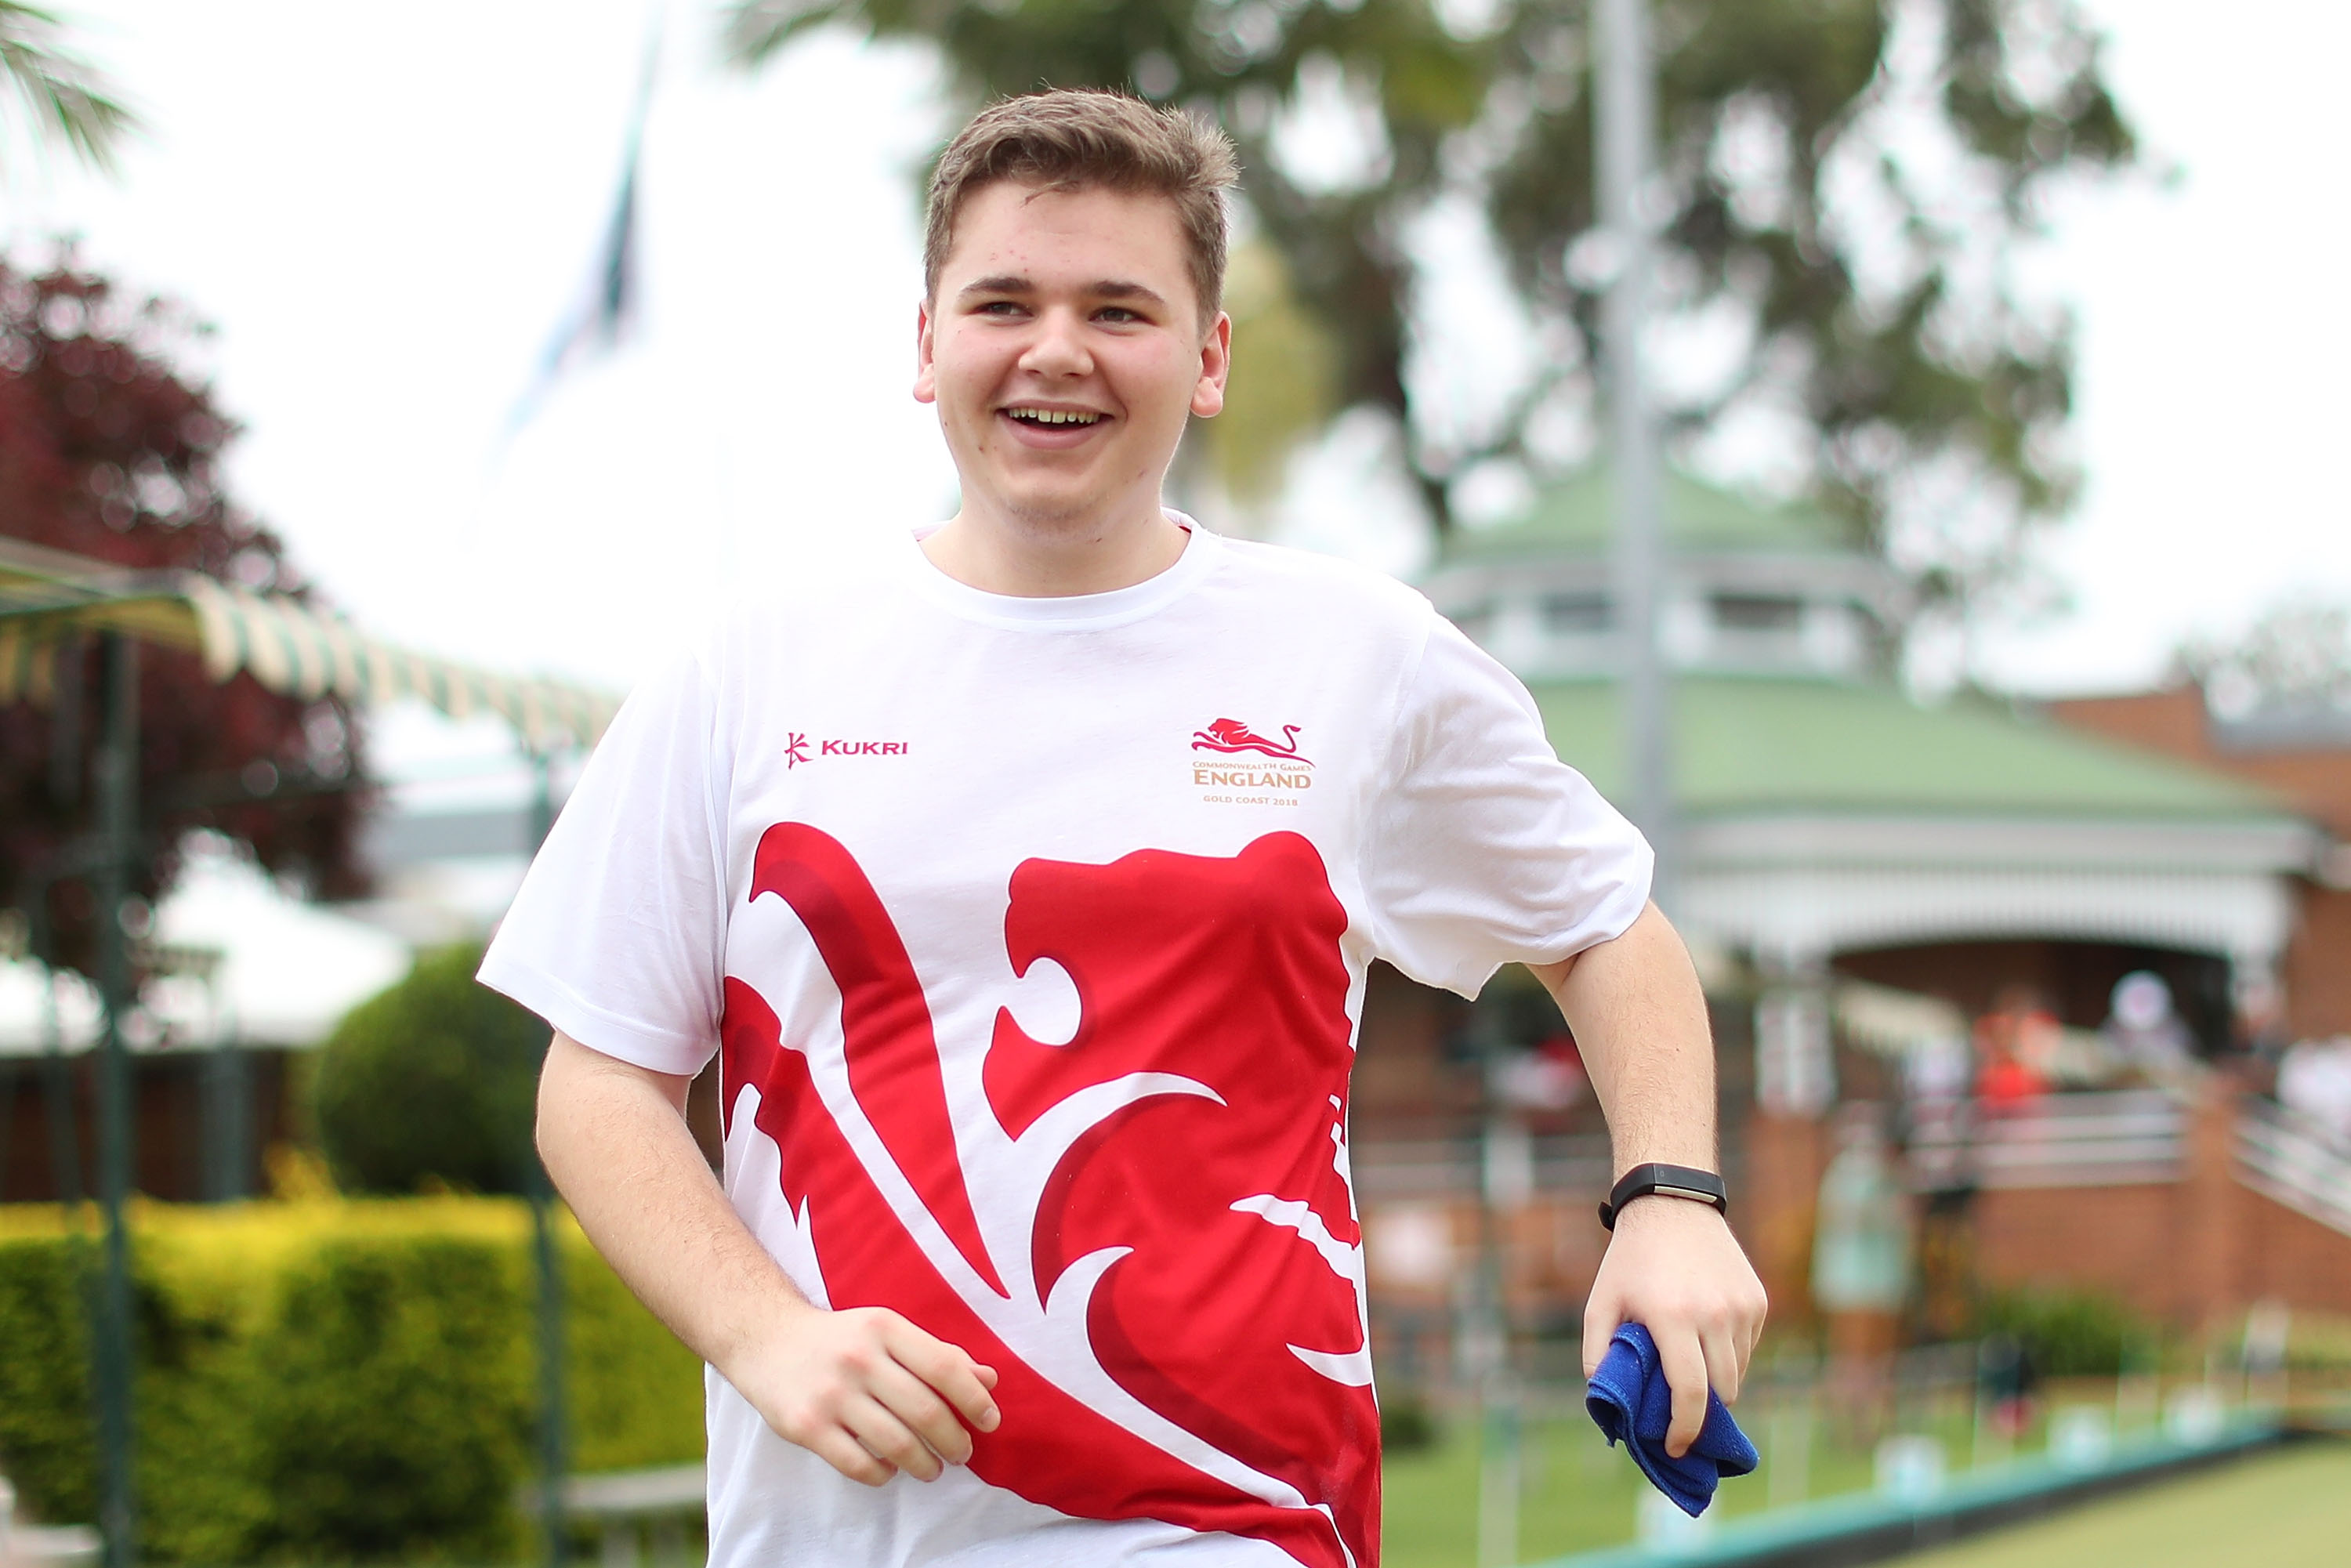 Kieran Rollings at Team England's Lawn Bowls preparation camp for Gold Coast 2018